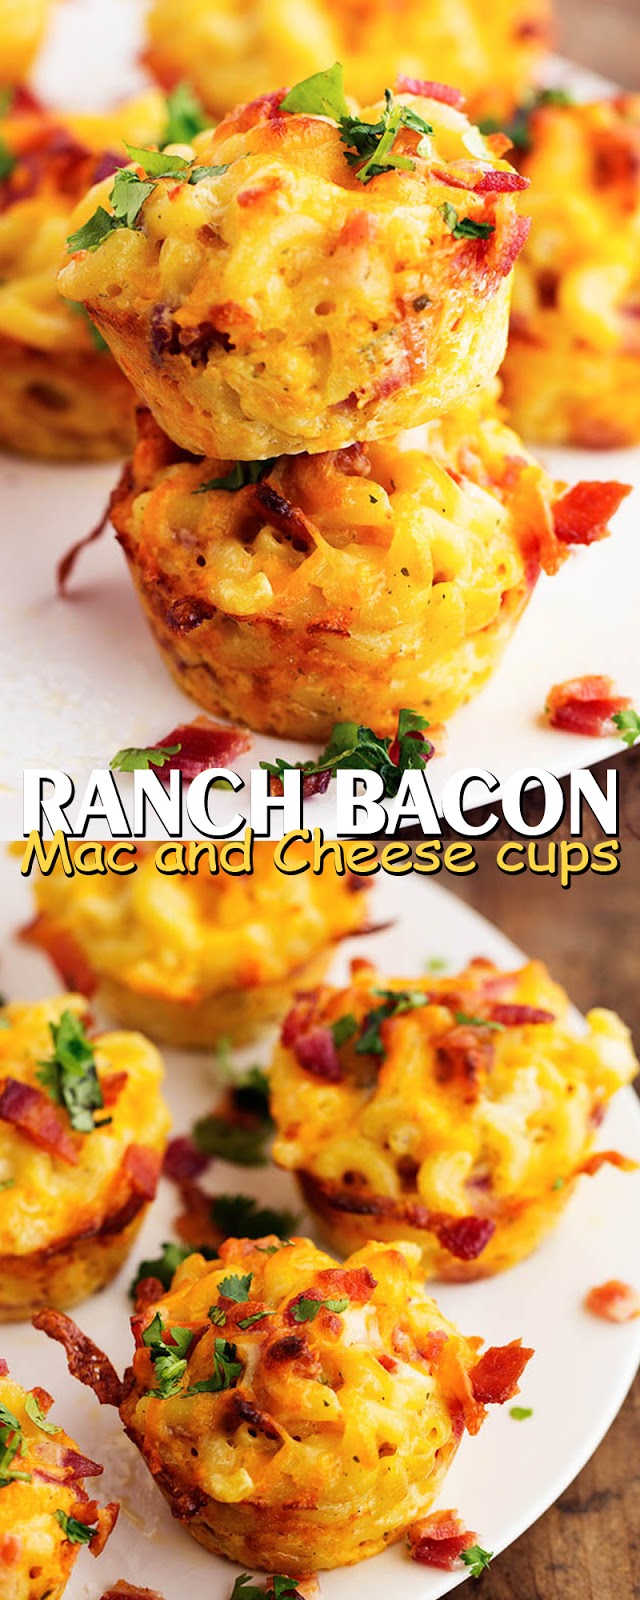 RANCH BACON MAC AND CHEESE CUPS